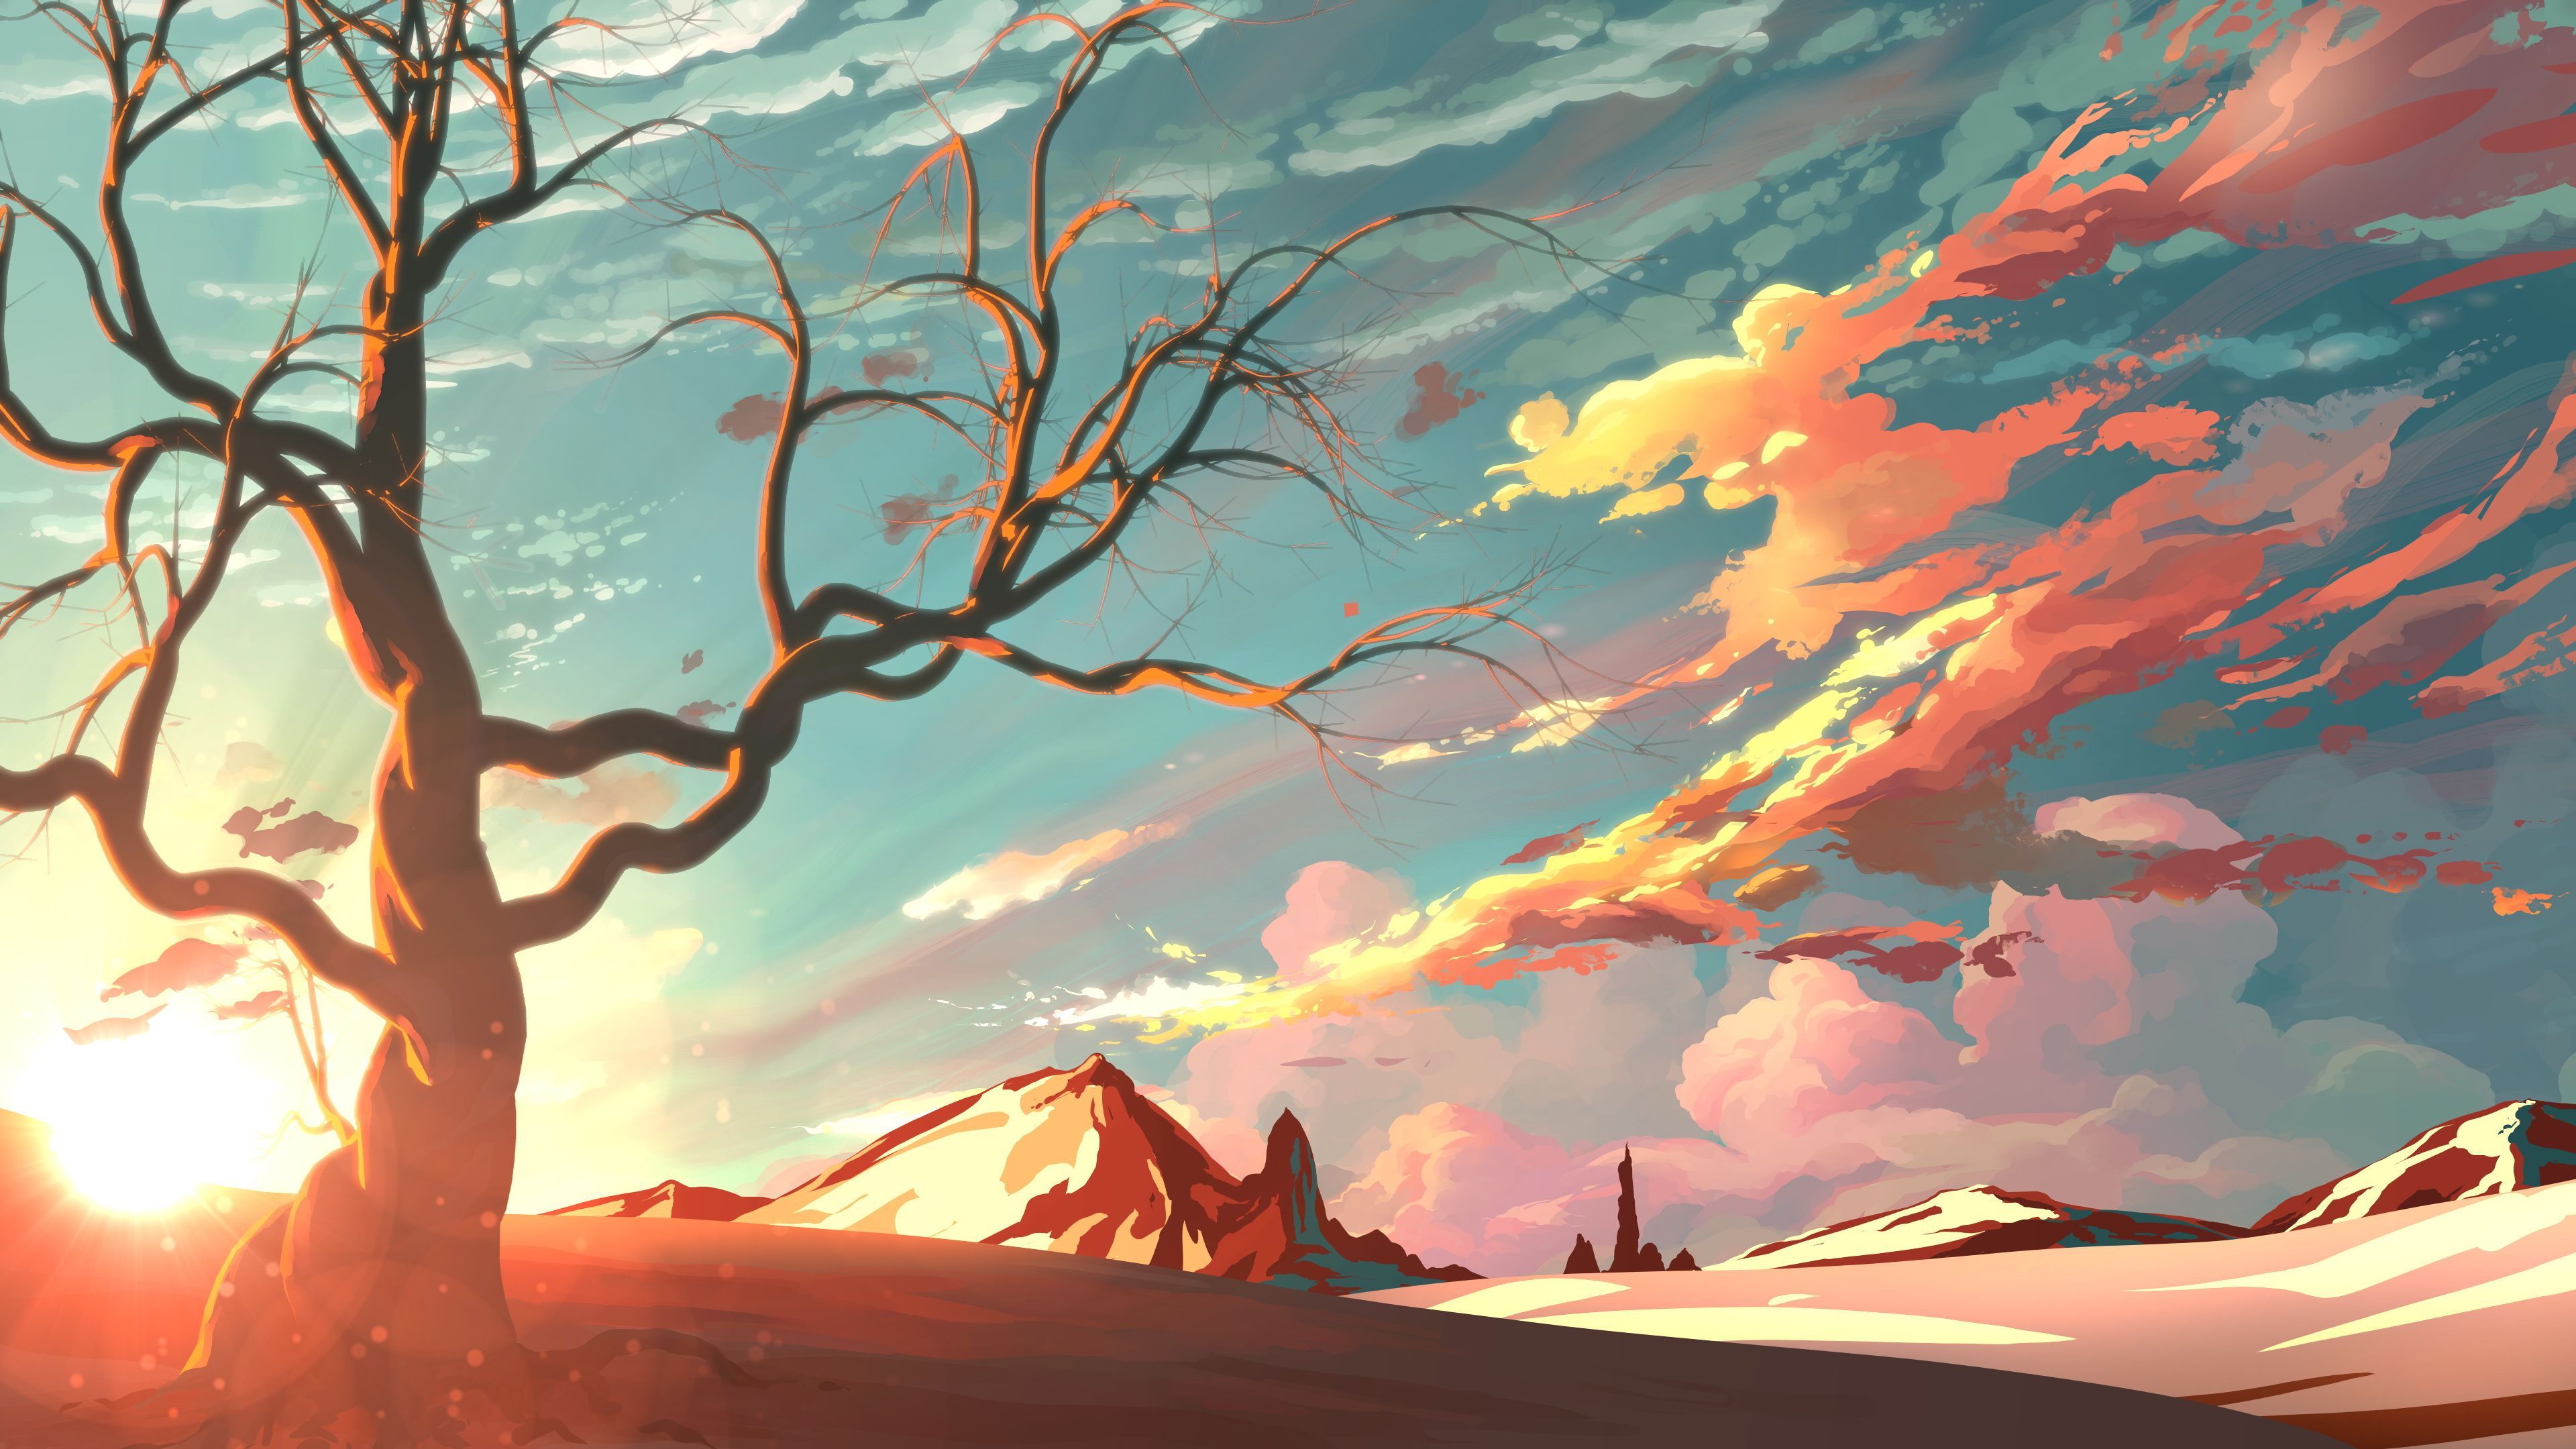 A tree in the middle of an open field - Anime landscape